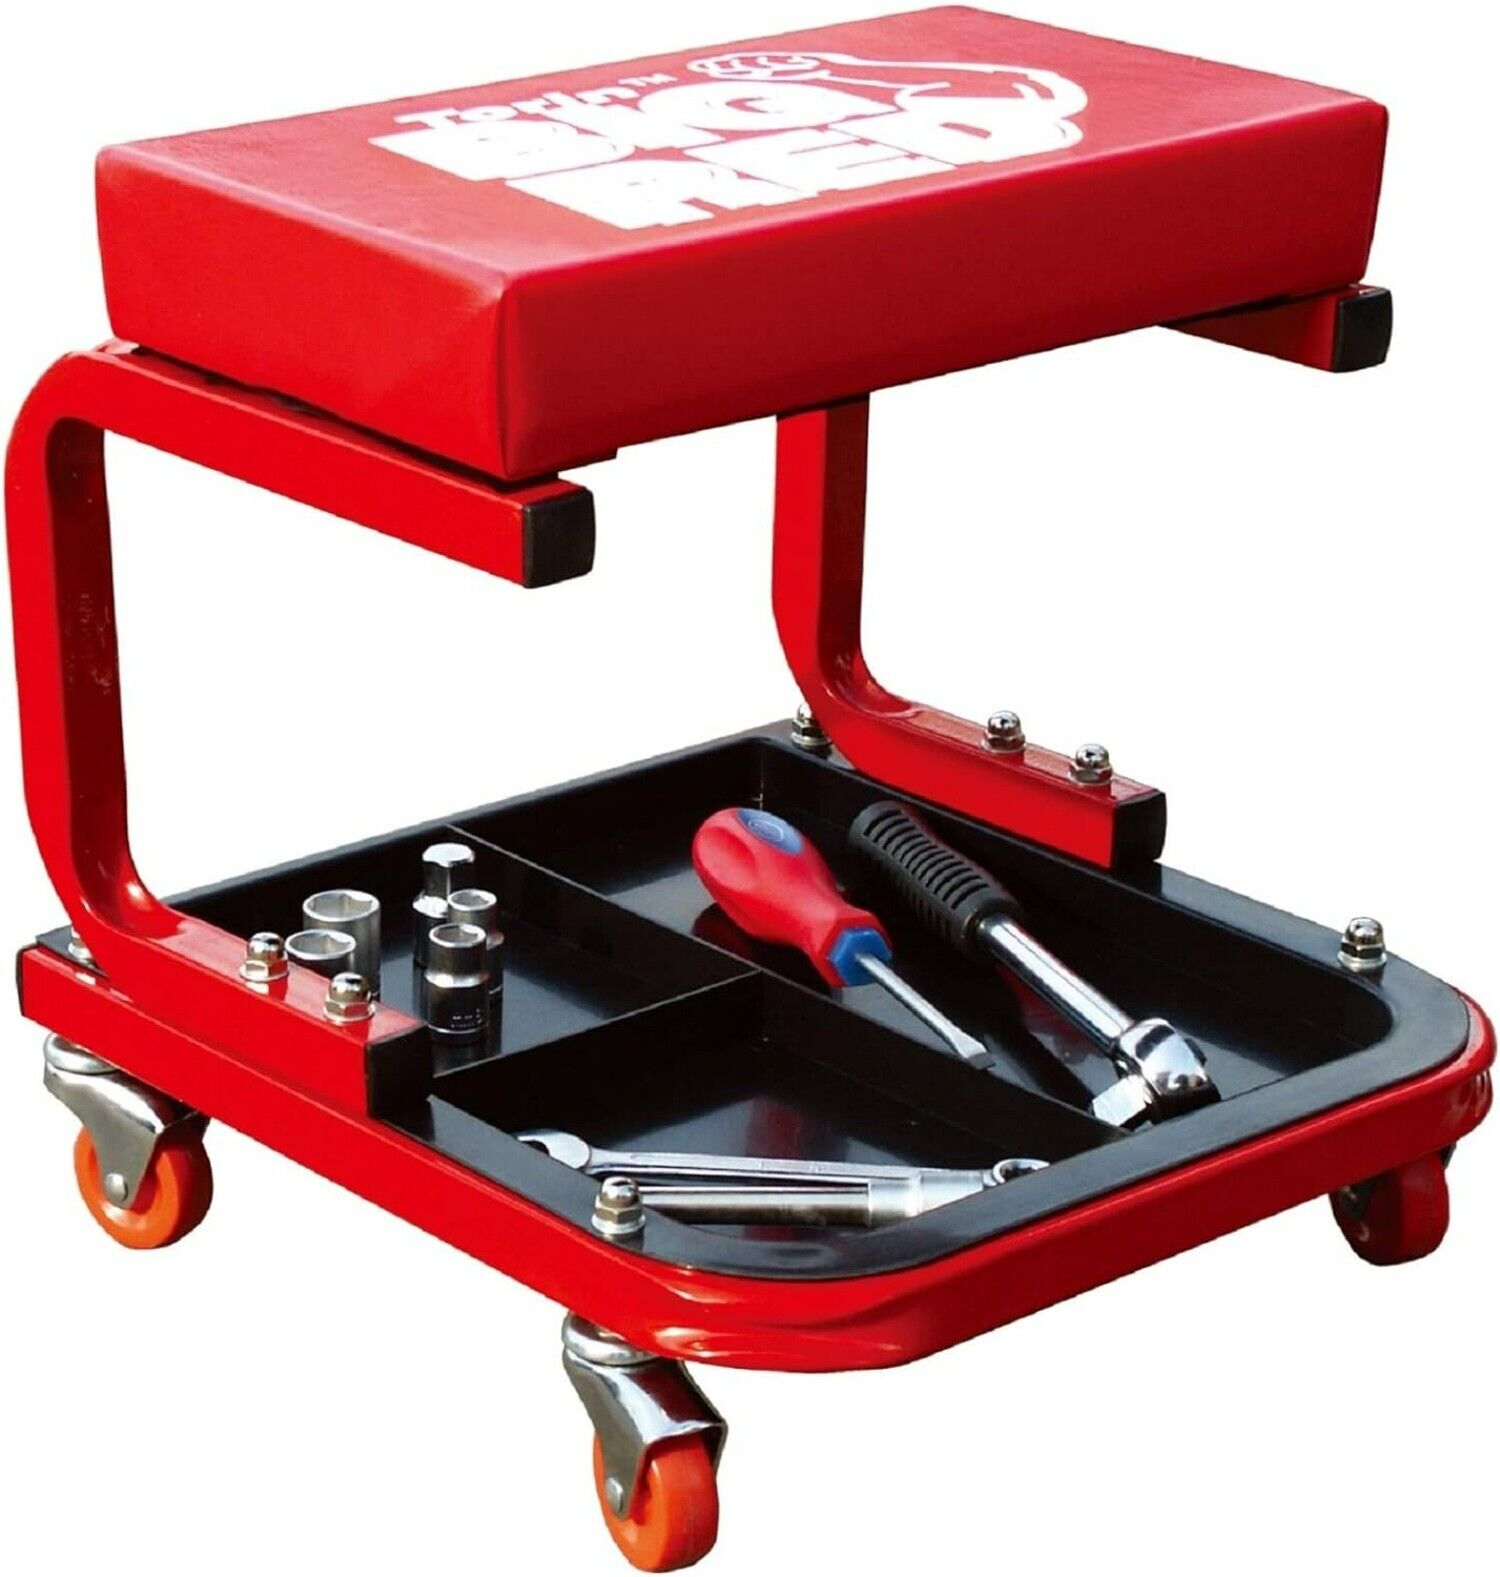 Red Rolling Creeper Garage/Shop Seat: Padded Mechanic Stool with Tool Tray Large